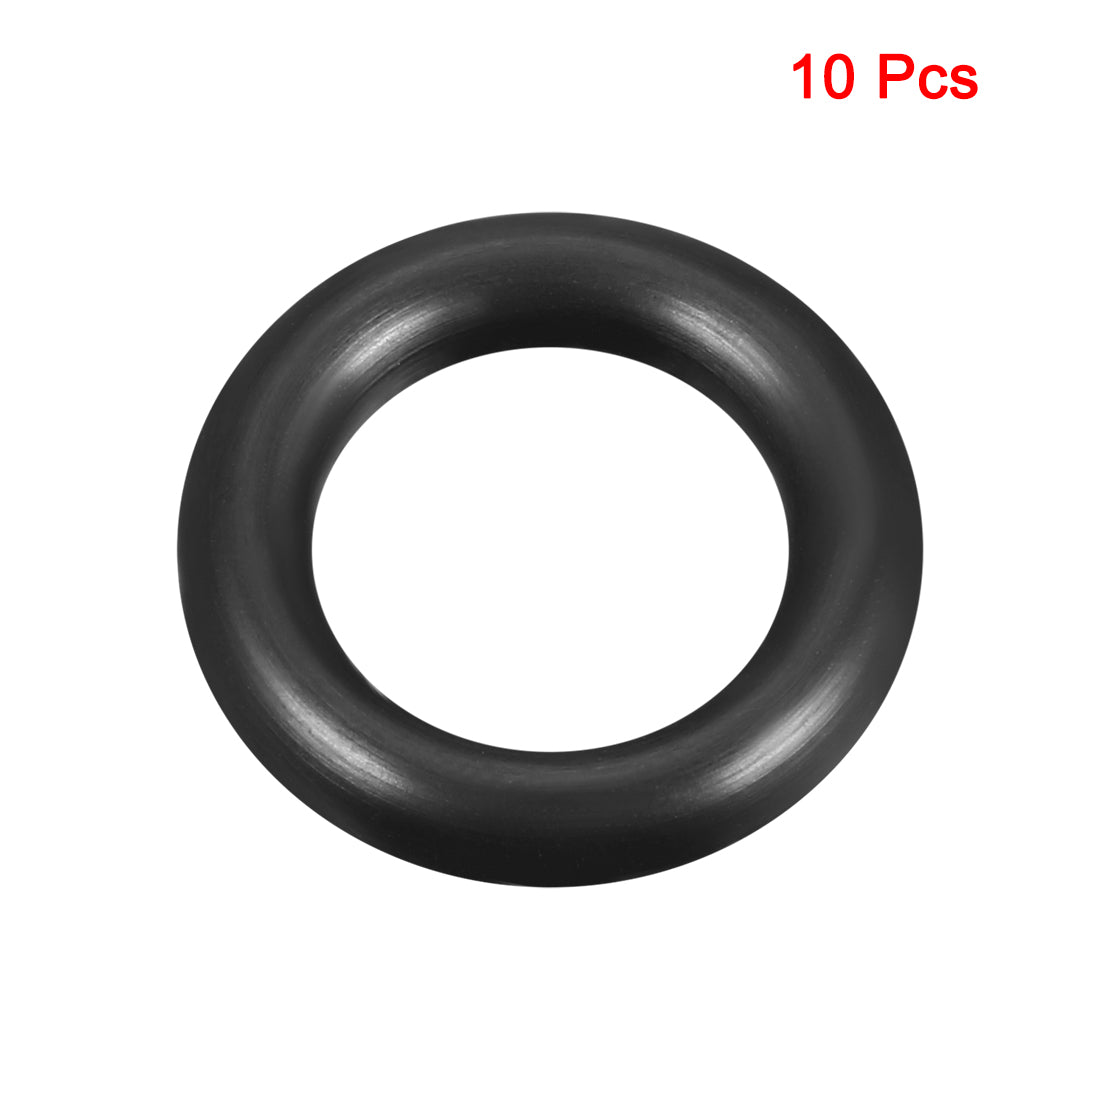 uxcell Uxcell O-Rings Nitrile Rubber 16mm x 26mm x 5mm Seal Rings Sealing Gasket 10pcs